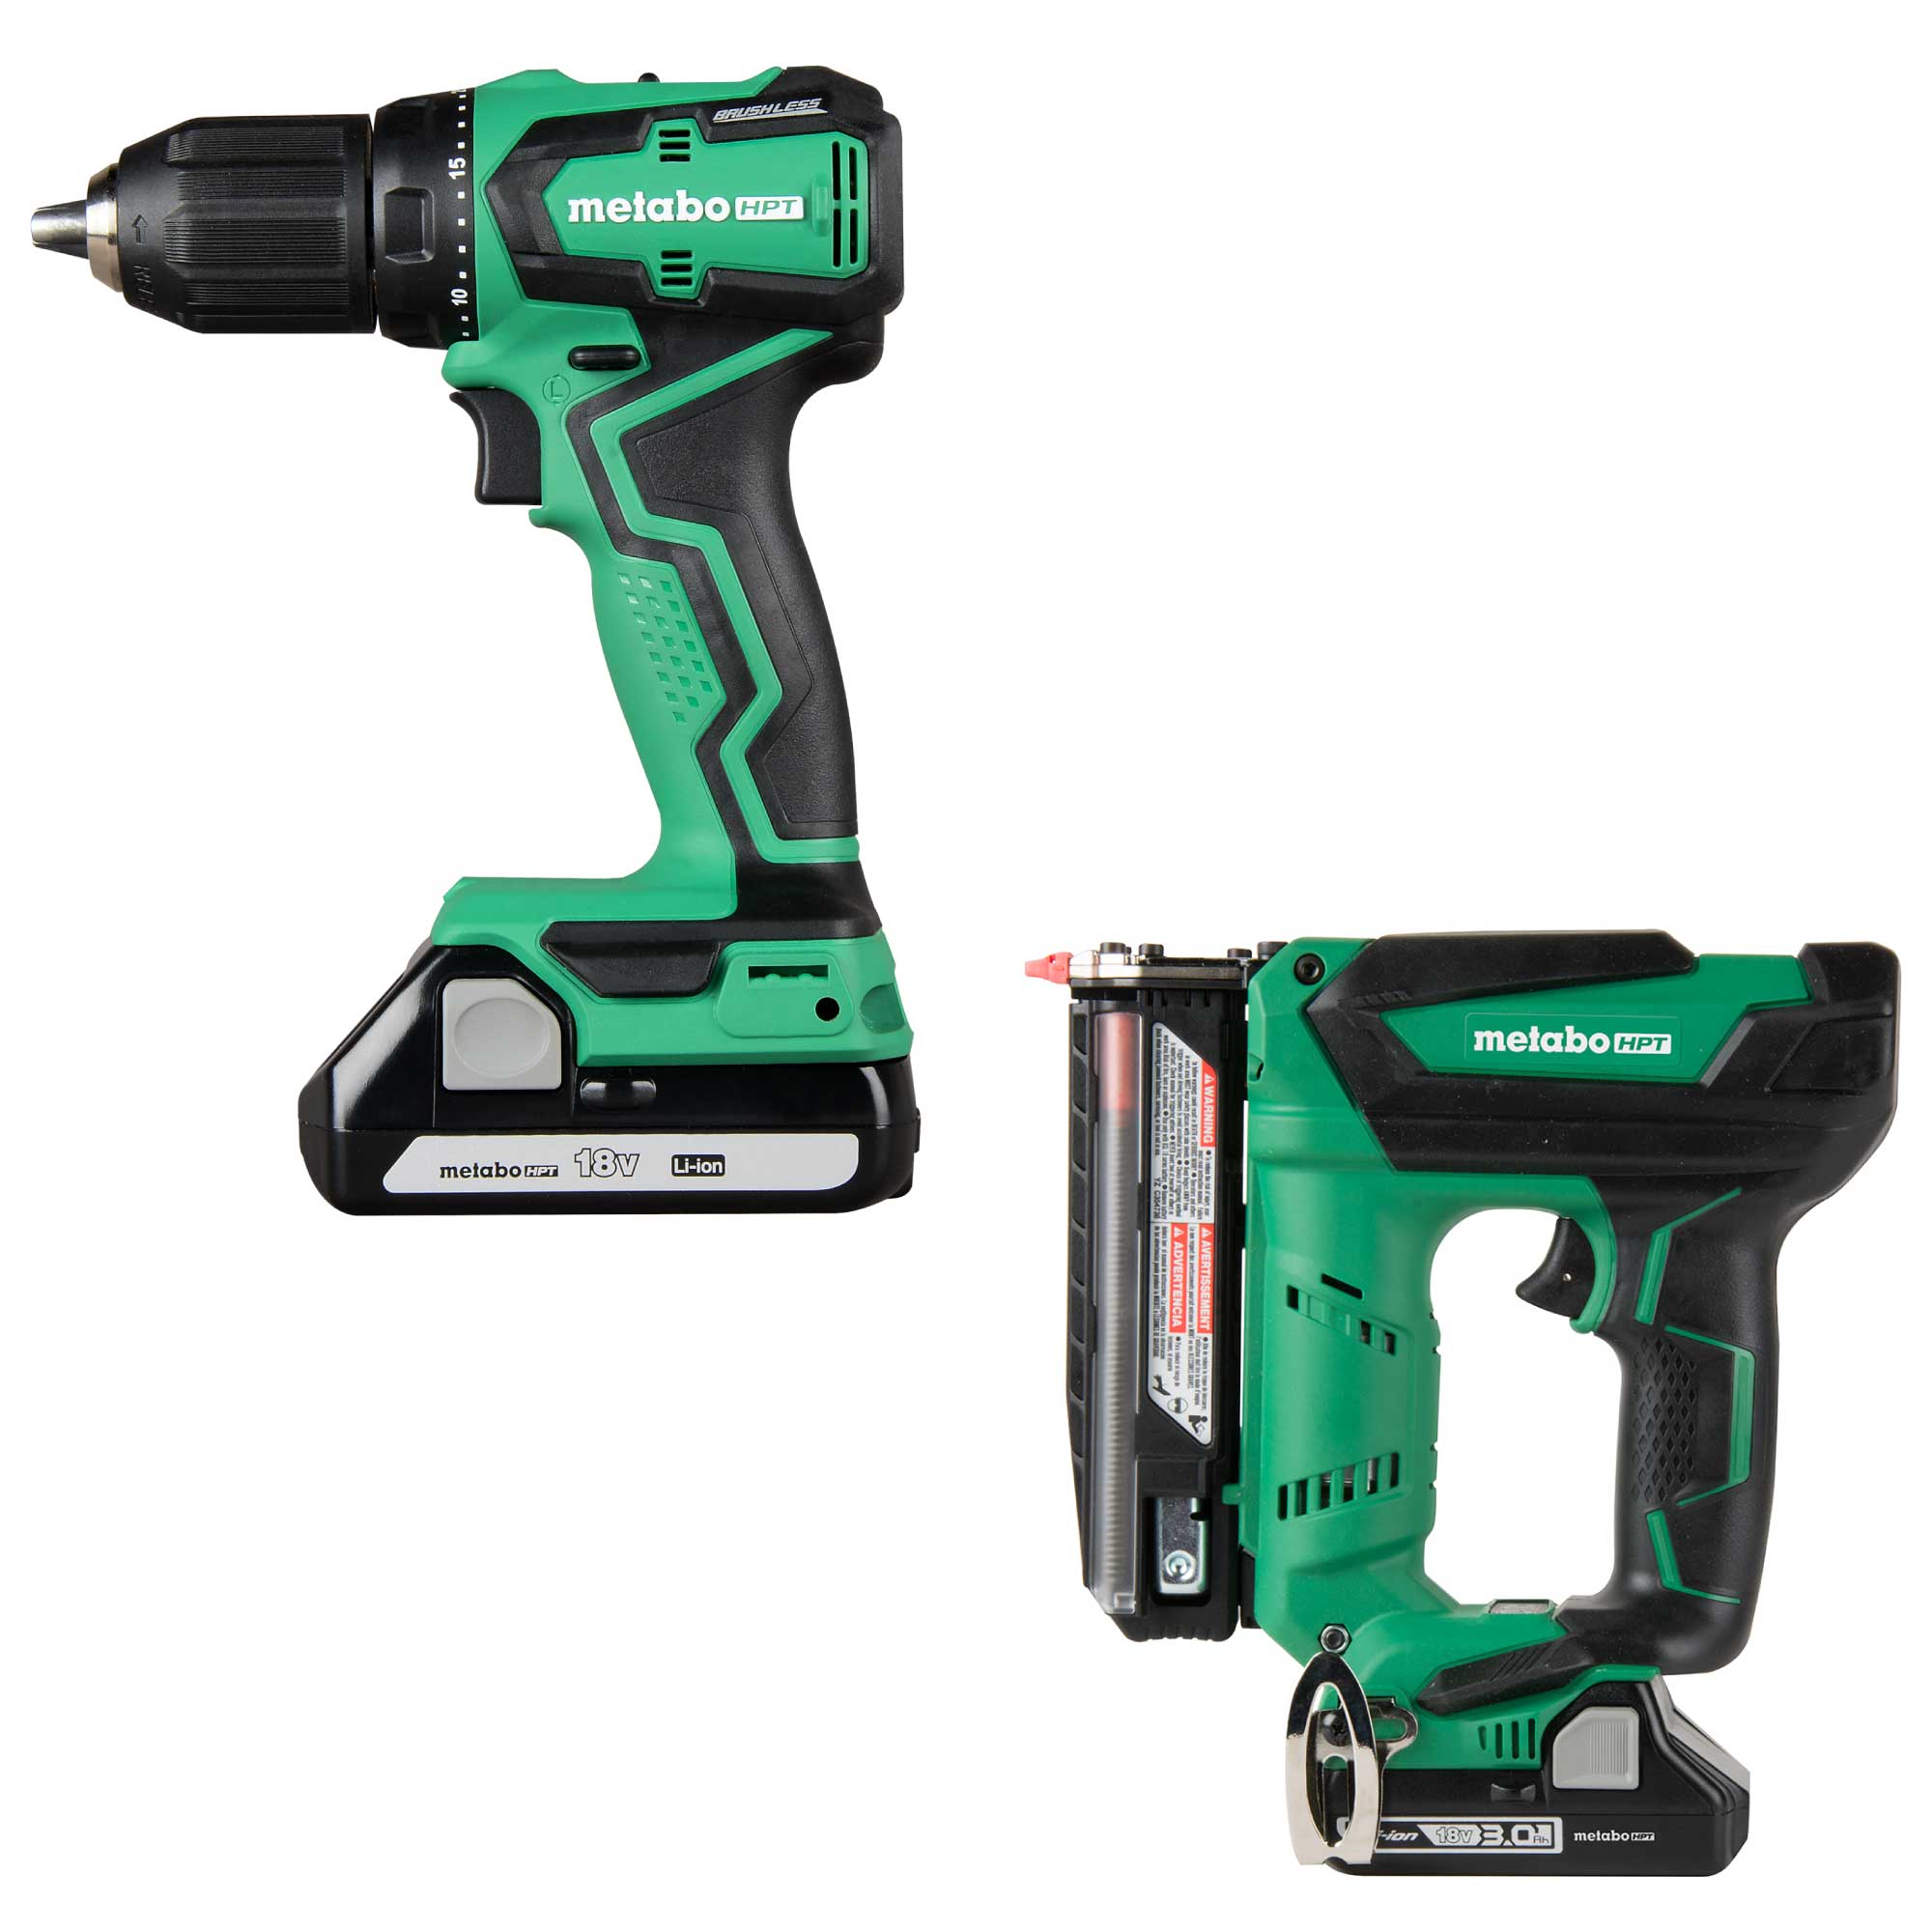 Metabo HPT MultiVolt 18-volt 1/2-in Keyless Brushless Cordless Drill (2-batteries included and Charger included) with MultiVolt 18-Volt 23-Gauge